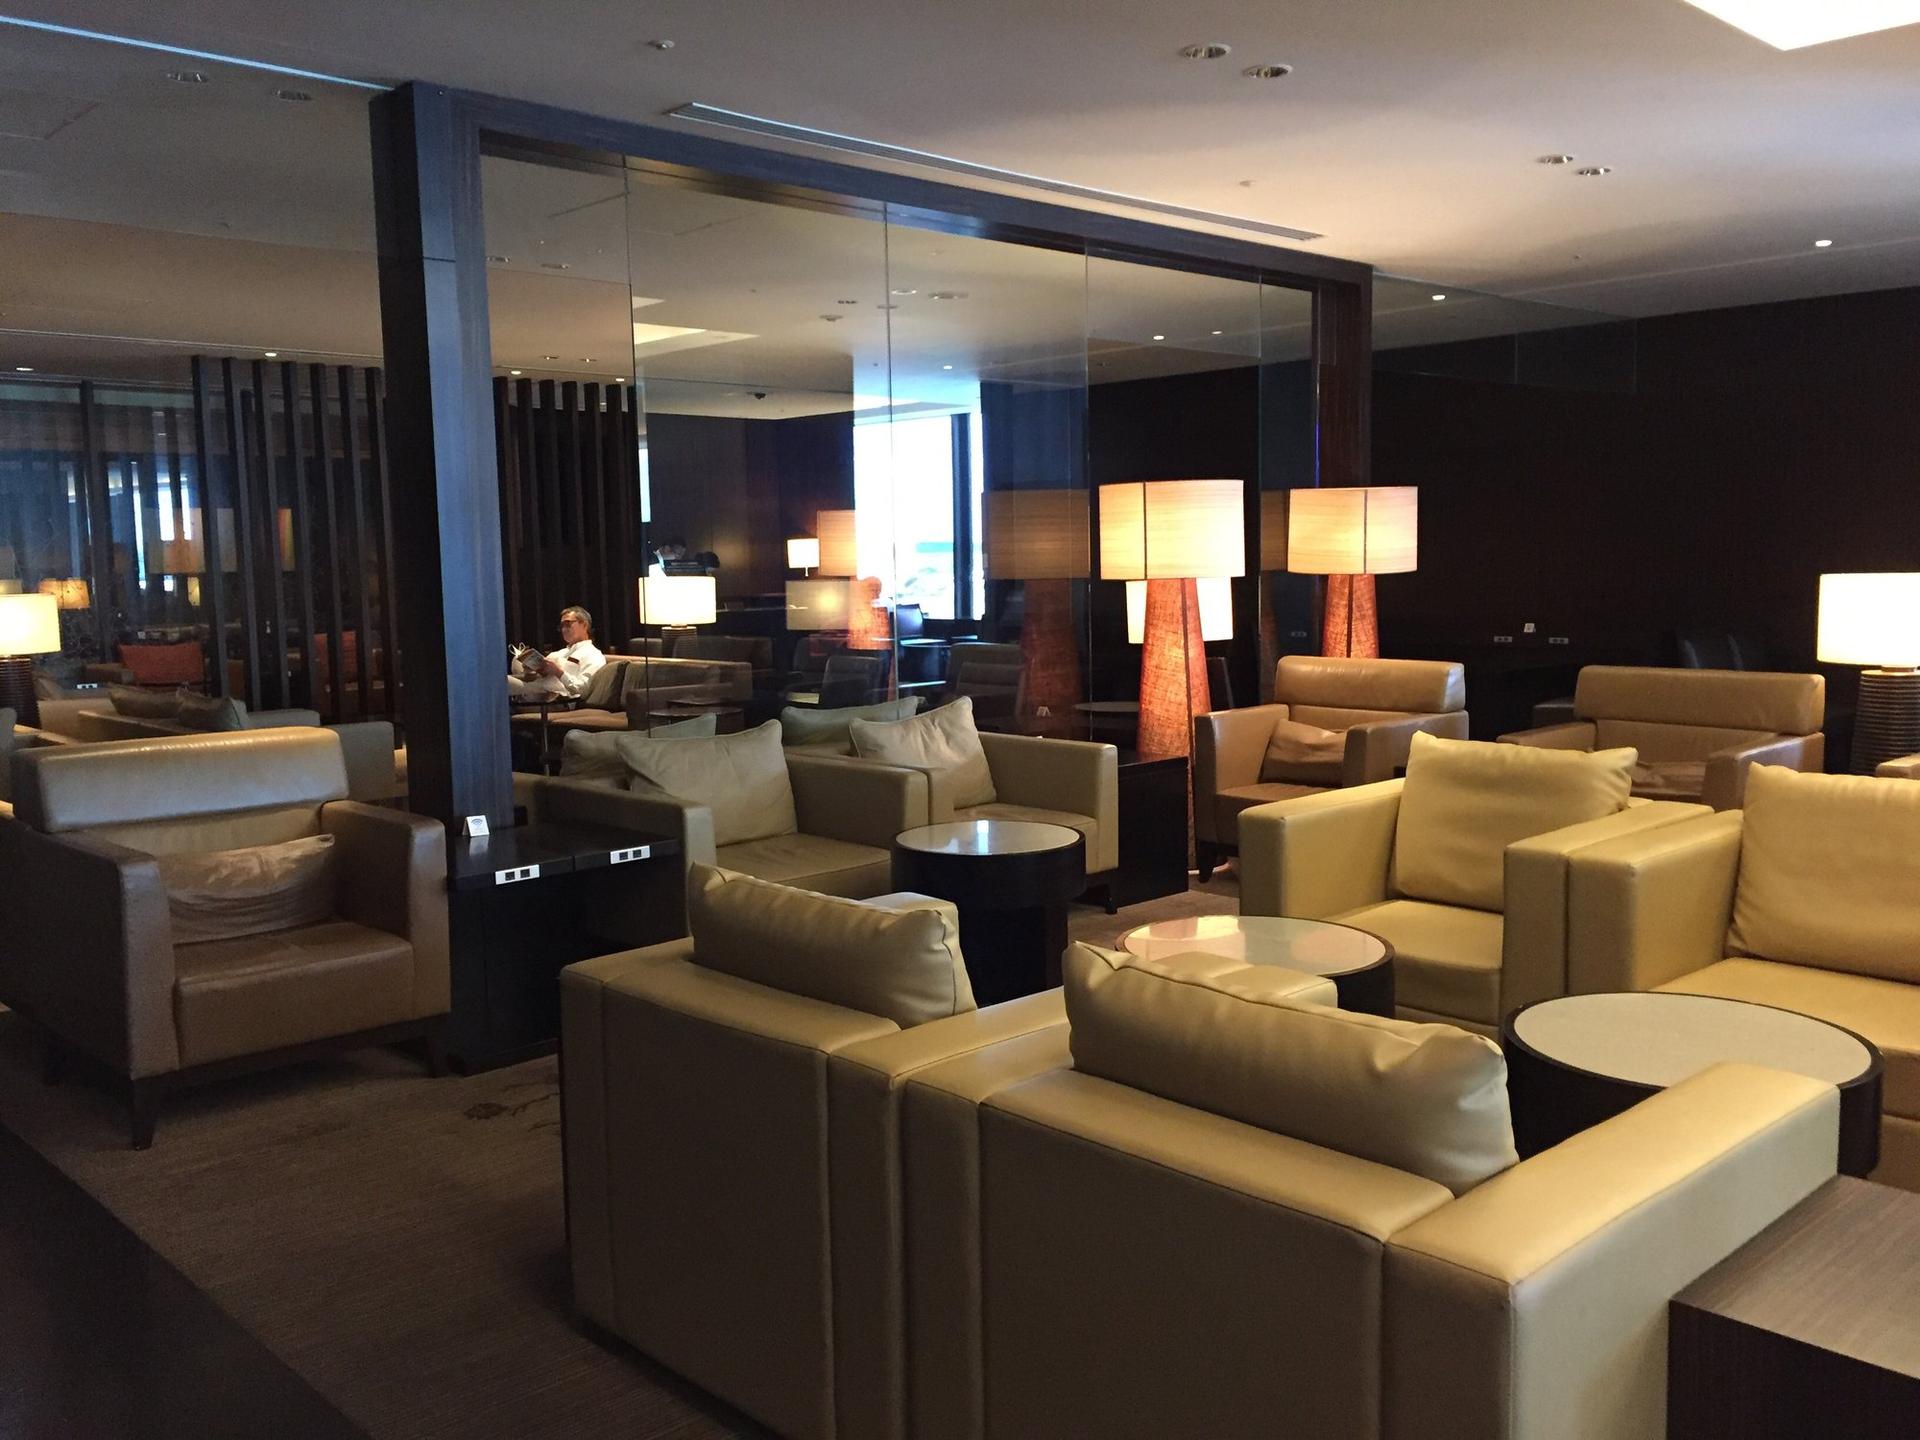 Japan Airlines JAL First Class Lounge image 36 of 50